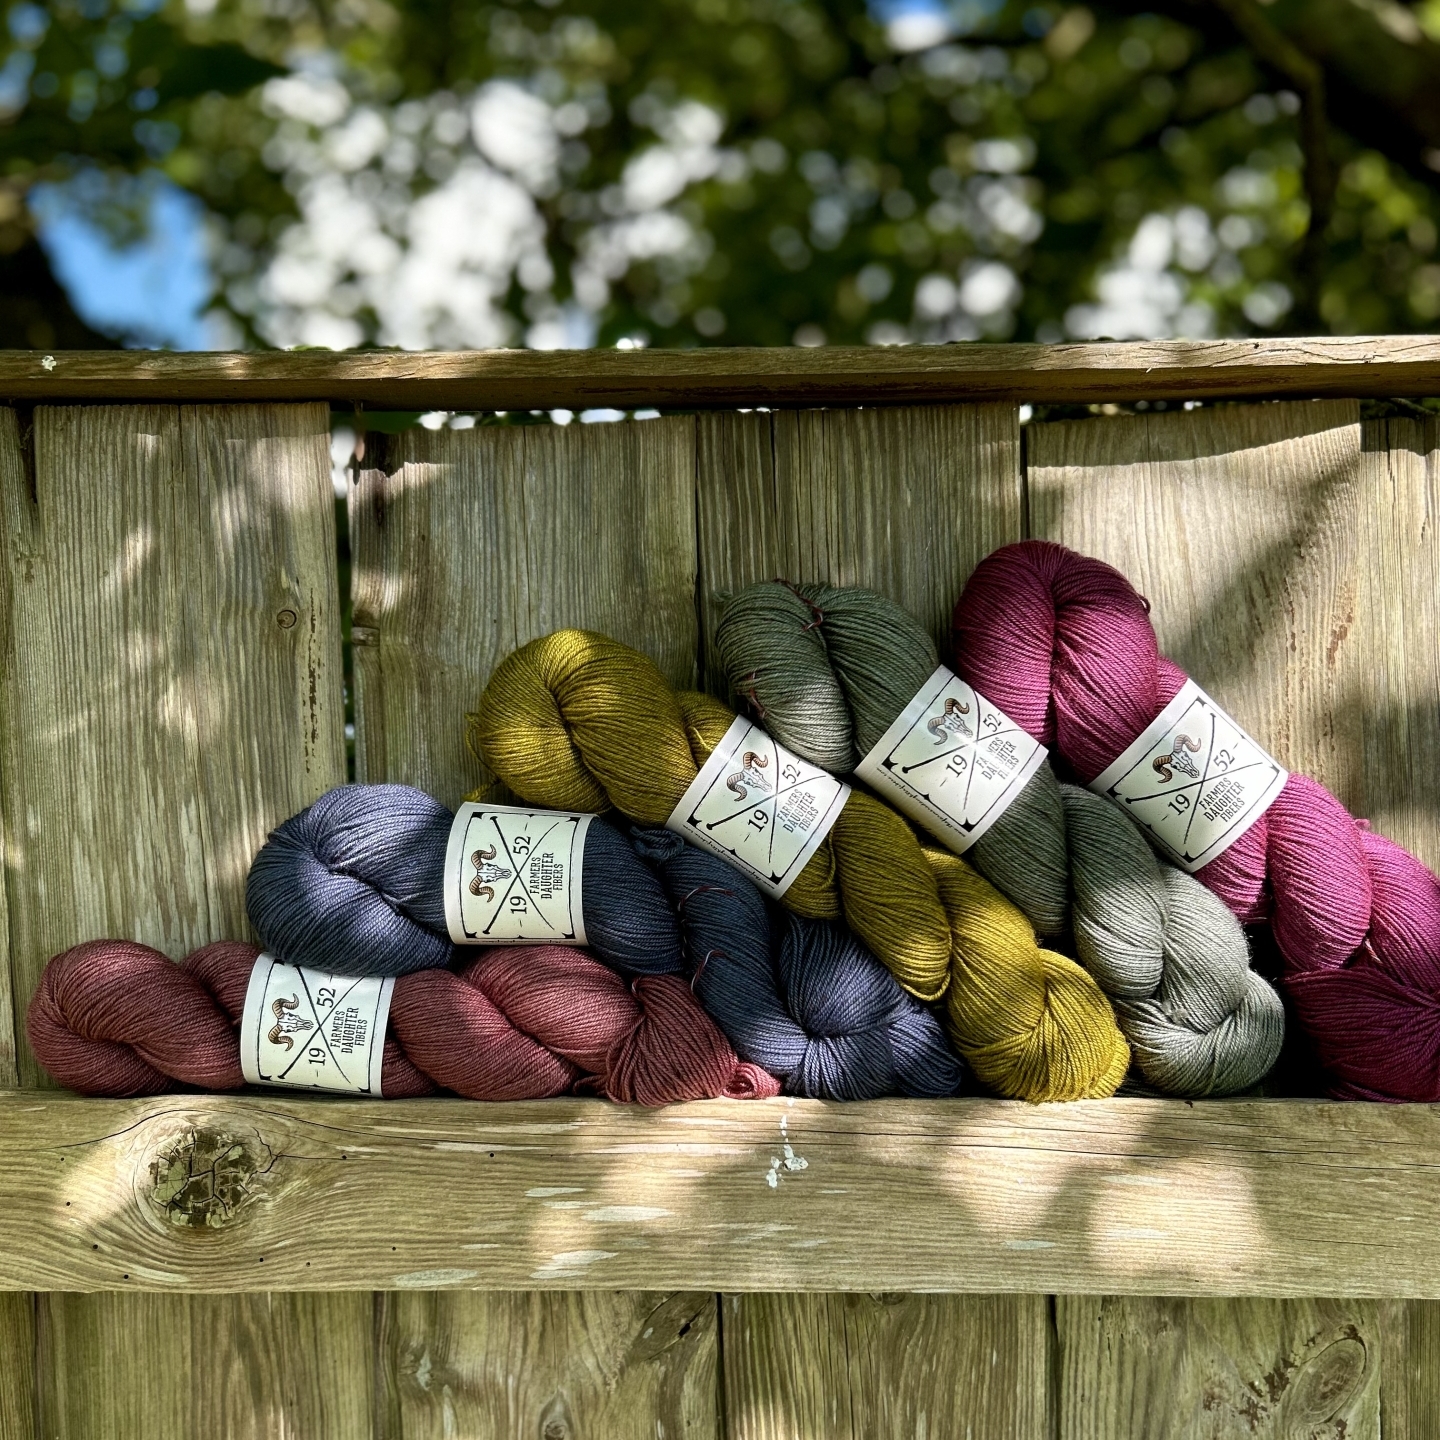 Salmon, blue, green, grey and pink skeins of Bear Paw Sock by the Farmer's Daughter fibers, leaning on a wooden fence